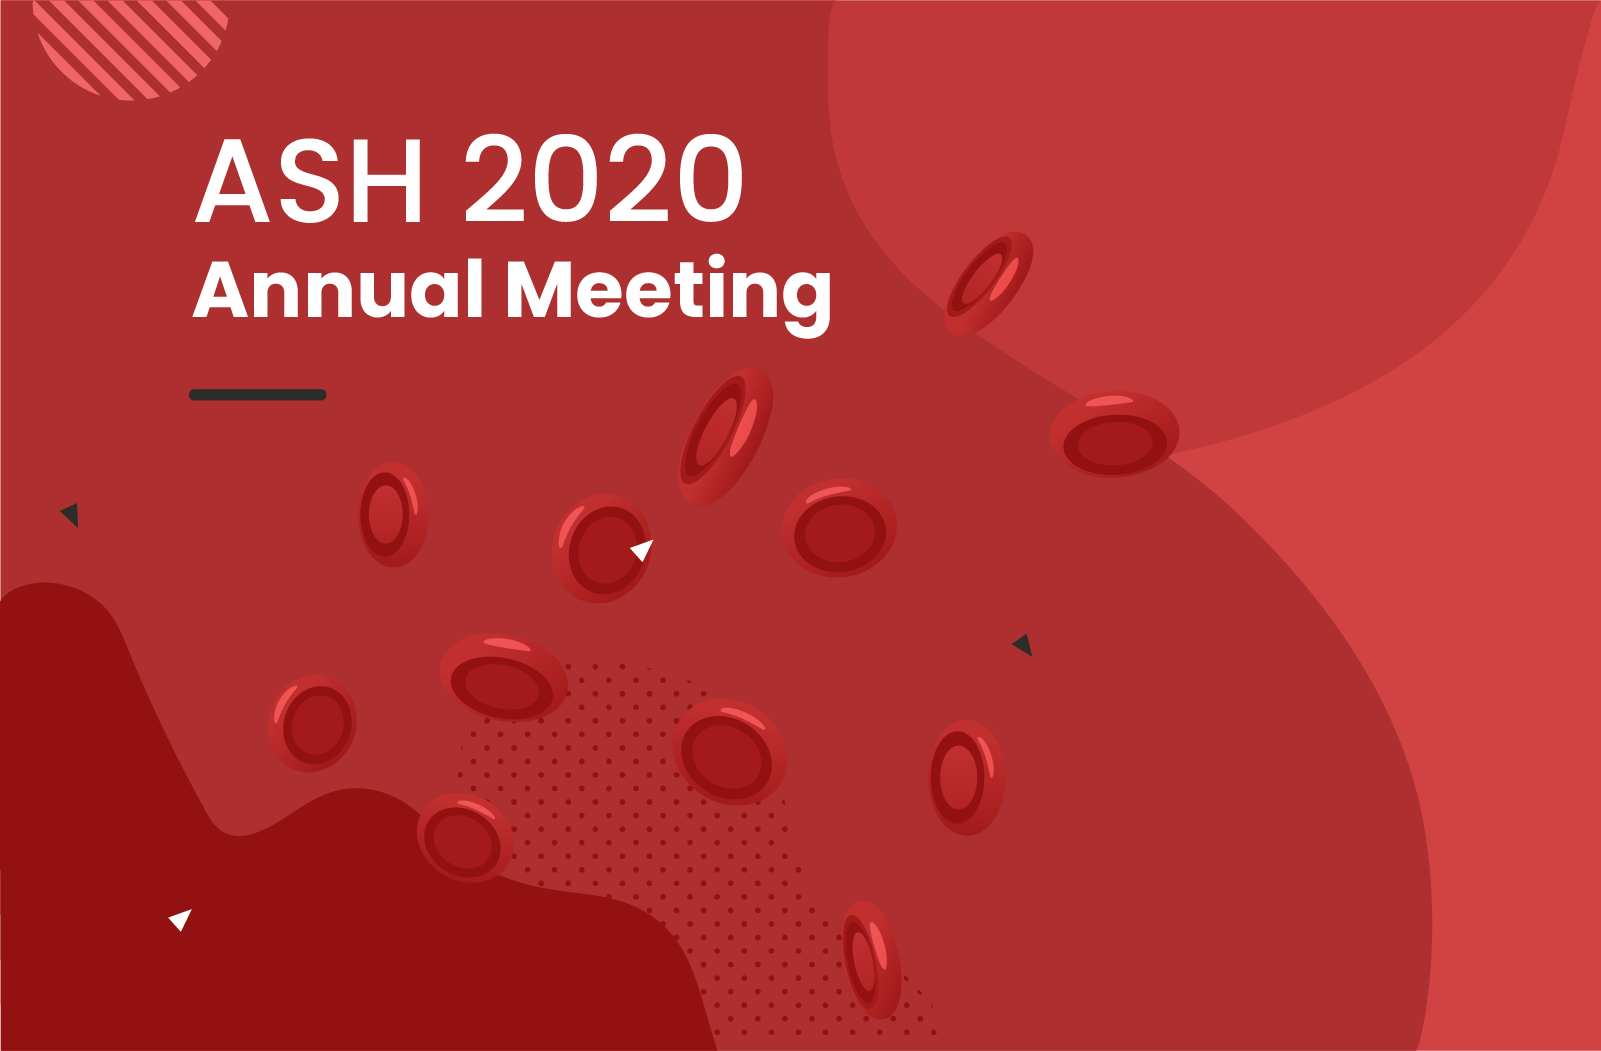 Genome editing using CRISPR and gene therapy captured attention during this year’s fully virtual ASH annual meeting.